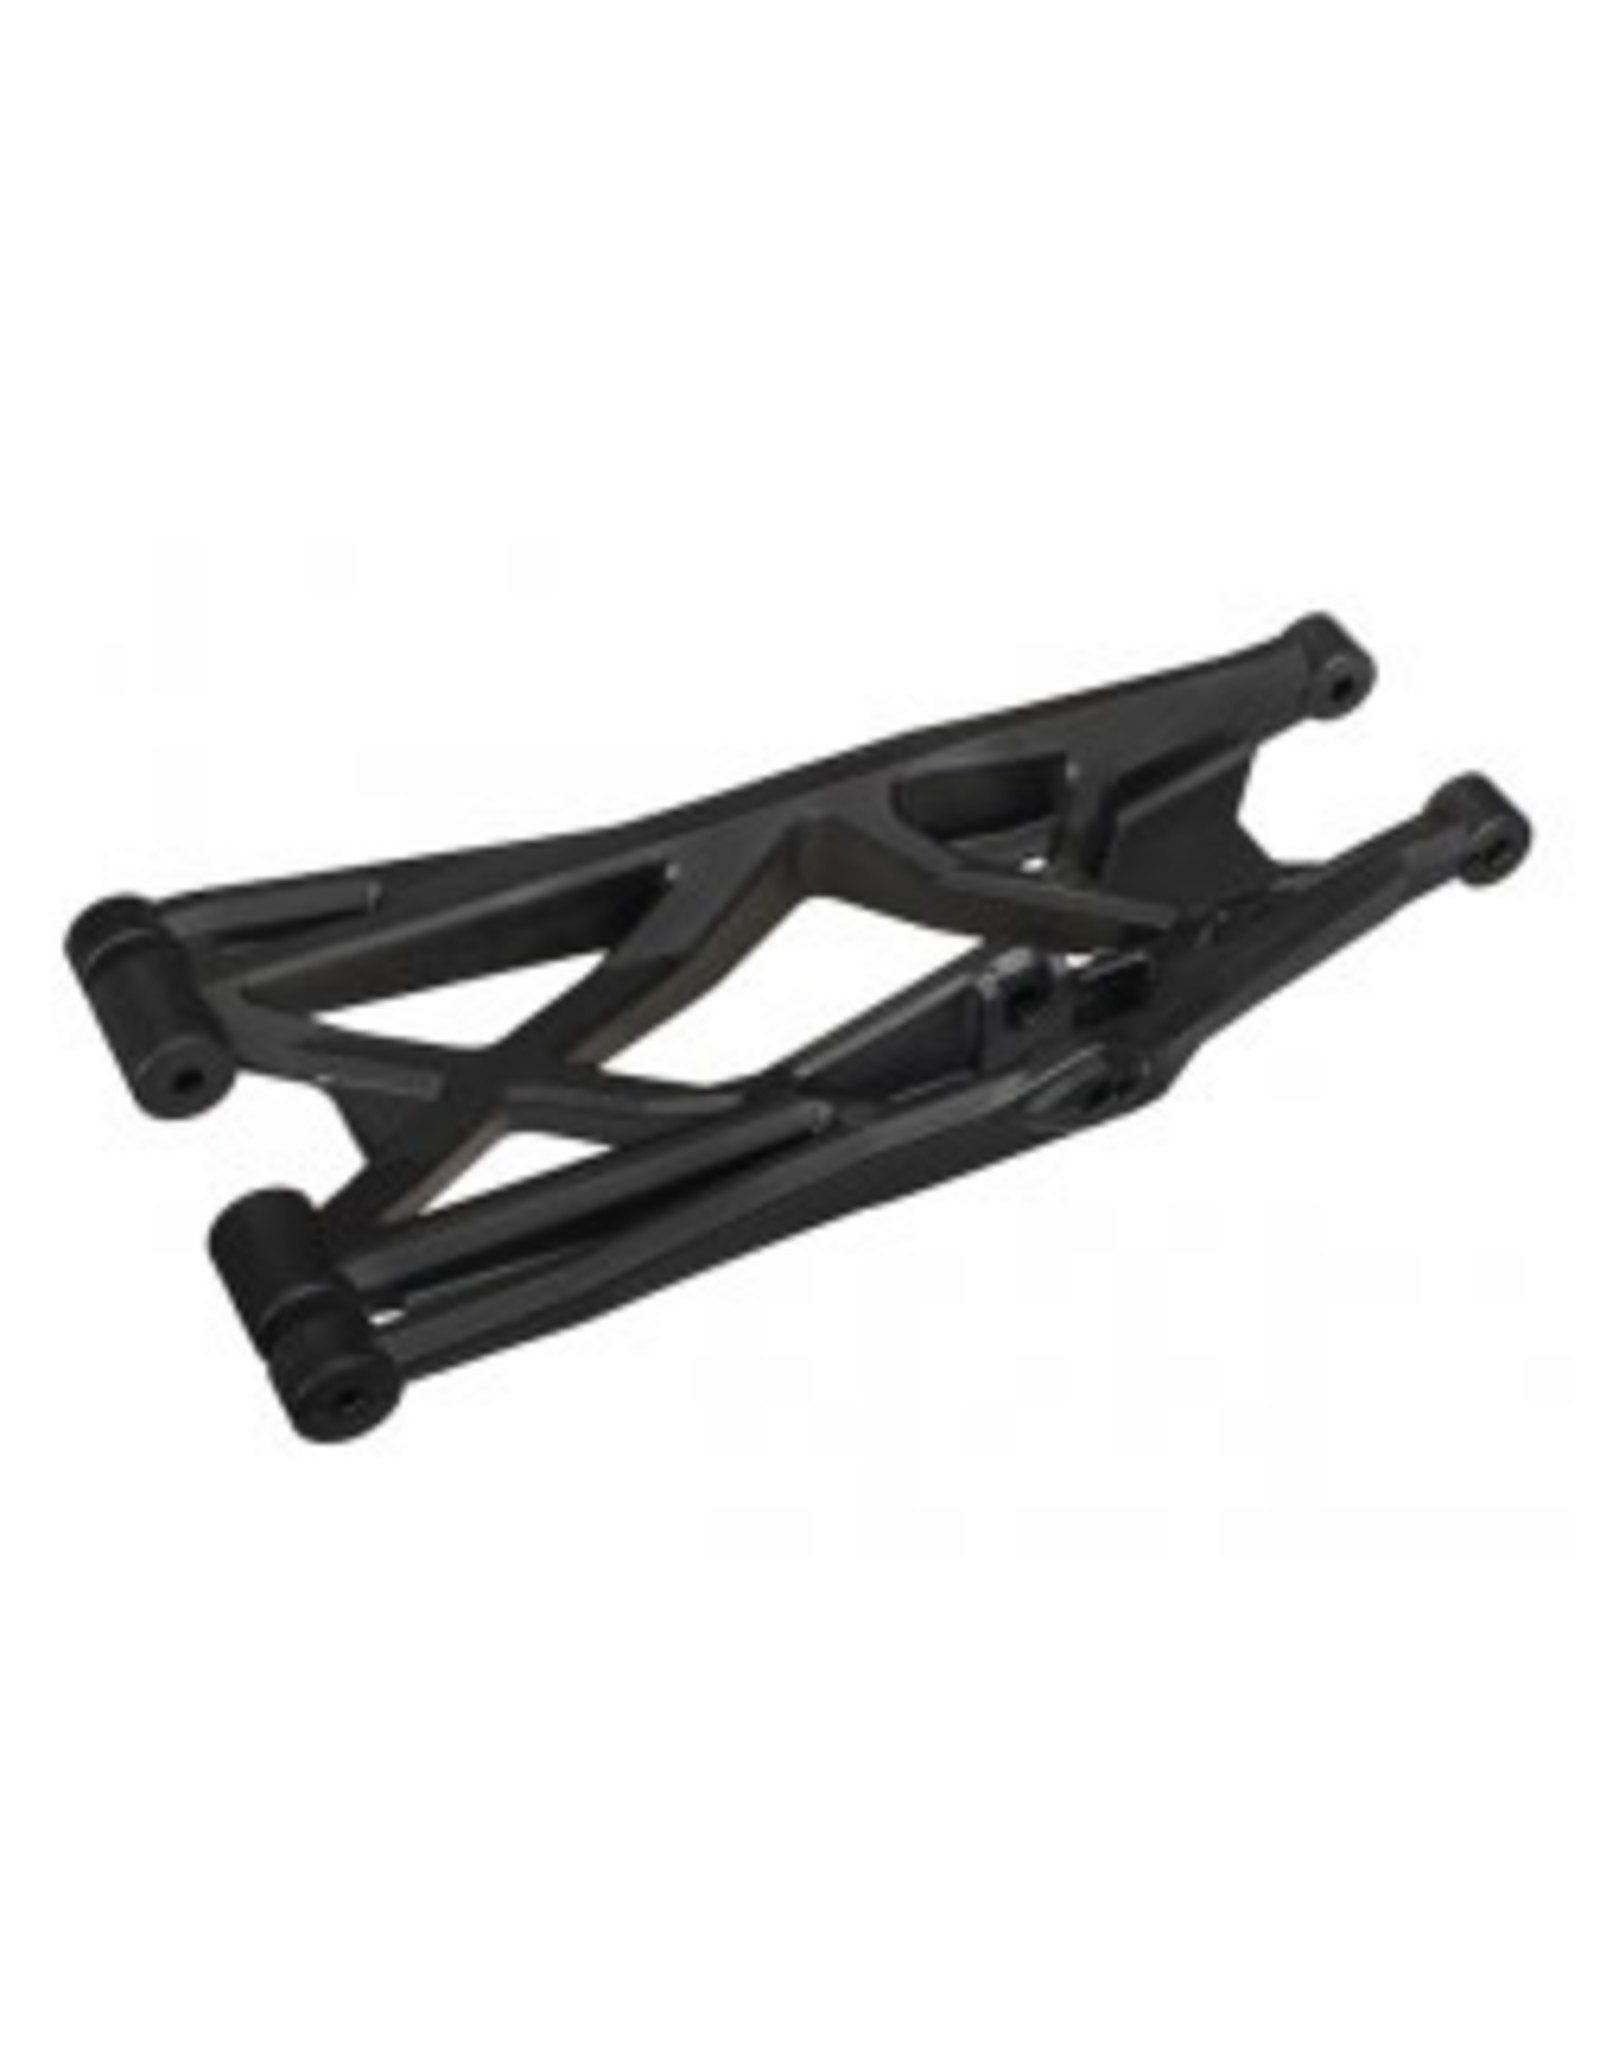 Traxxas Traxxas 7731 Suspension Arm Lower Left (Front or rear)